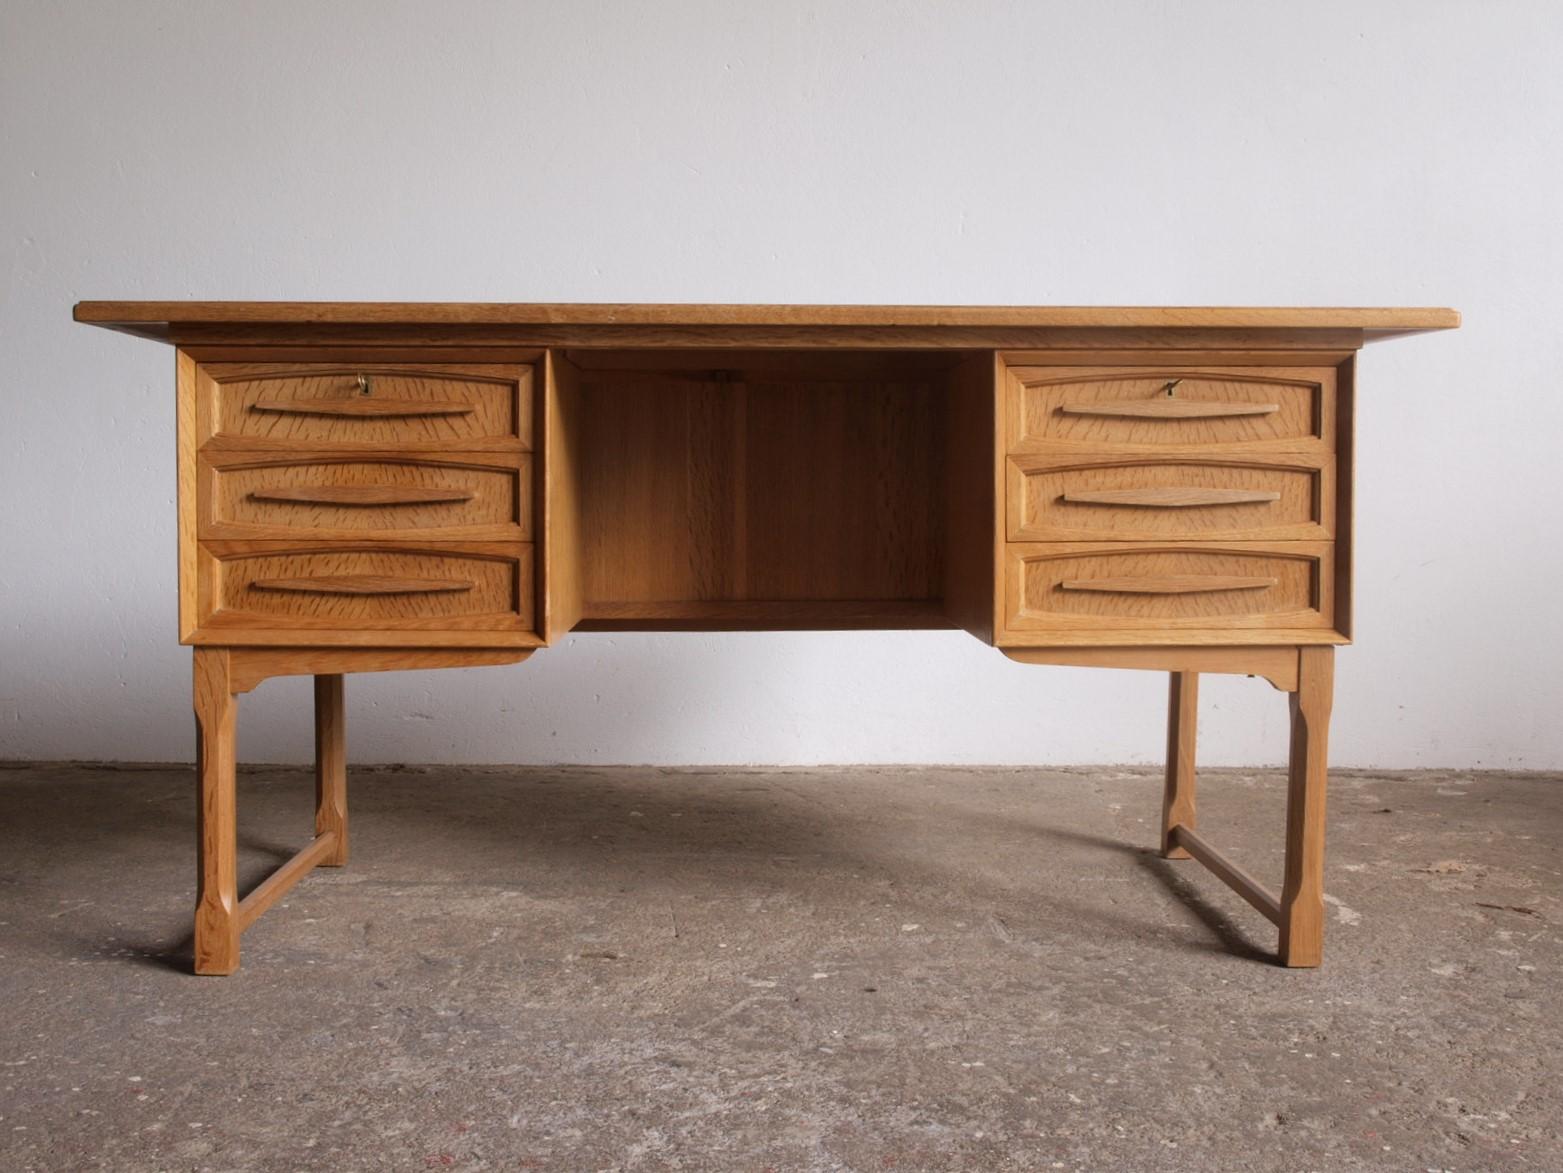 Solid oak writing desk complete with drawers, attributed to Danish furniture designerHenning Henry Kjærnulf, a compelling piece. This creation harmoniously blends bold Baroque elements with the finesse of Mid-Century Modernism, resulting in a design